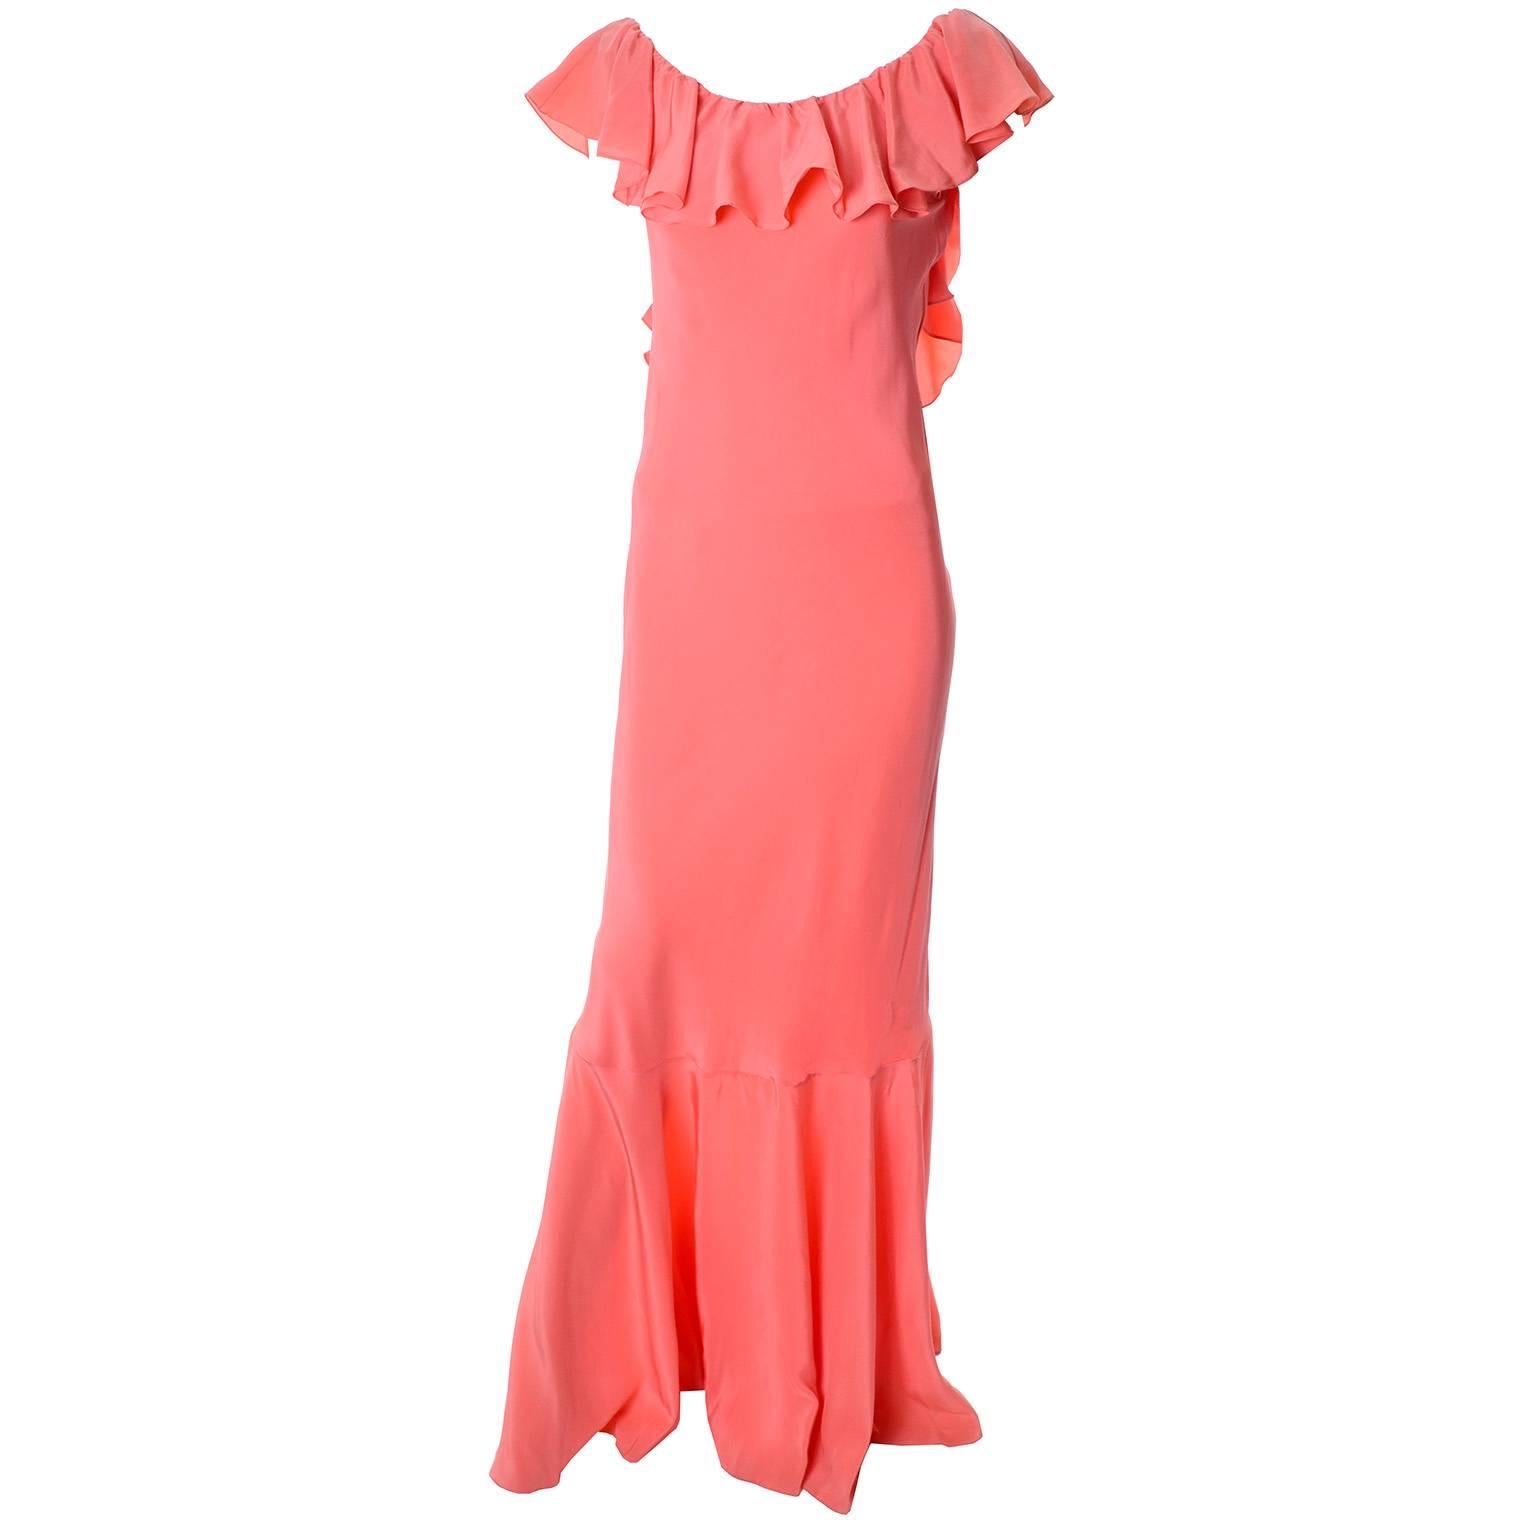 New vintage salmon silk vintage long dress by Oscar de la Renta with the original tags. This beautiful dress was purchased at Dorcas Hardin in Georgetown, DC. in the 1990's. The dress has a gorgeous ruffled neckline that plunges down the back and a